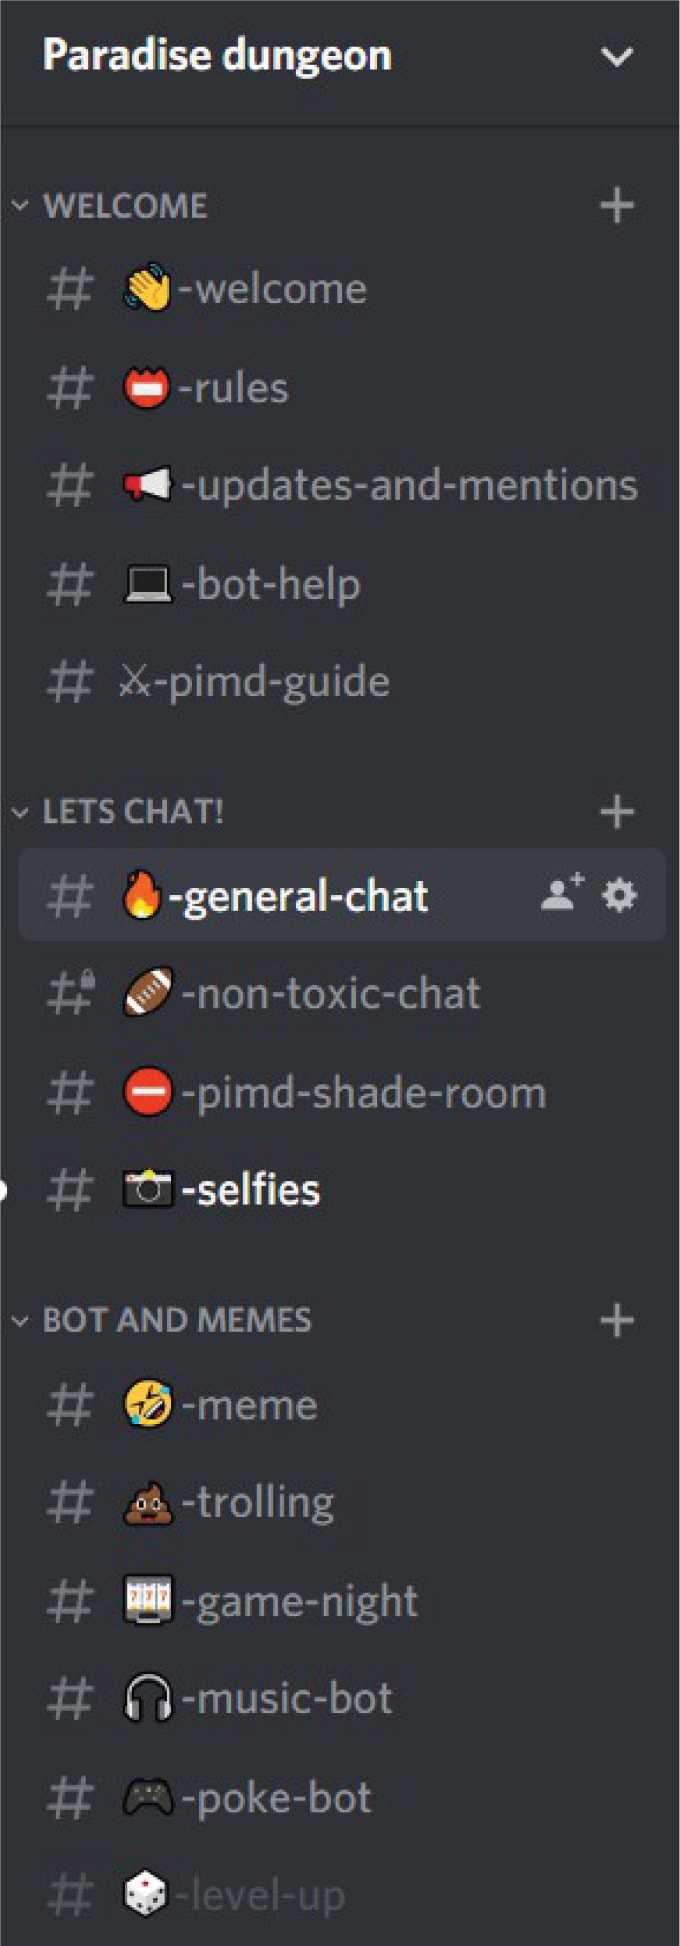 Create an amazing and active discord server by Hannybunnns